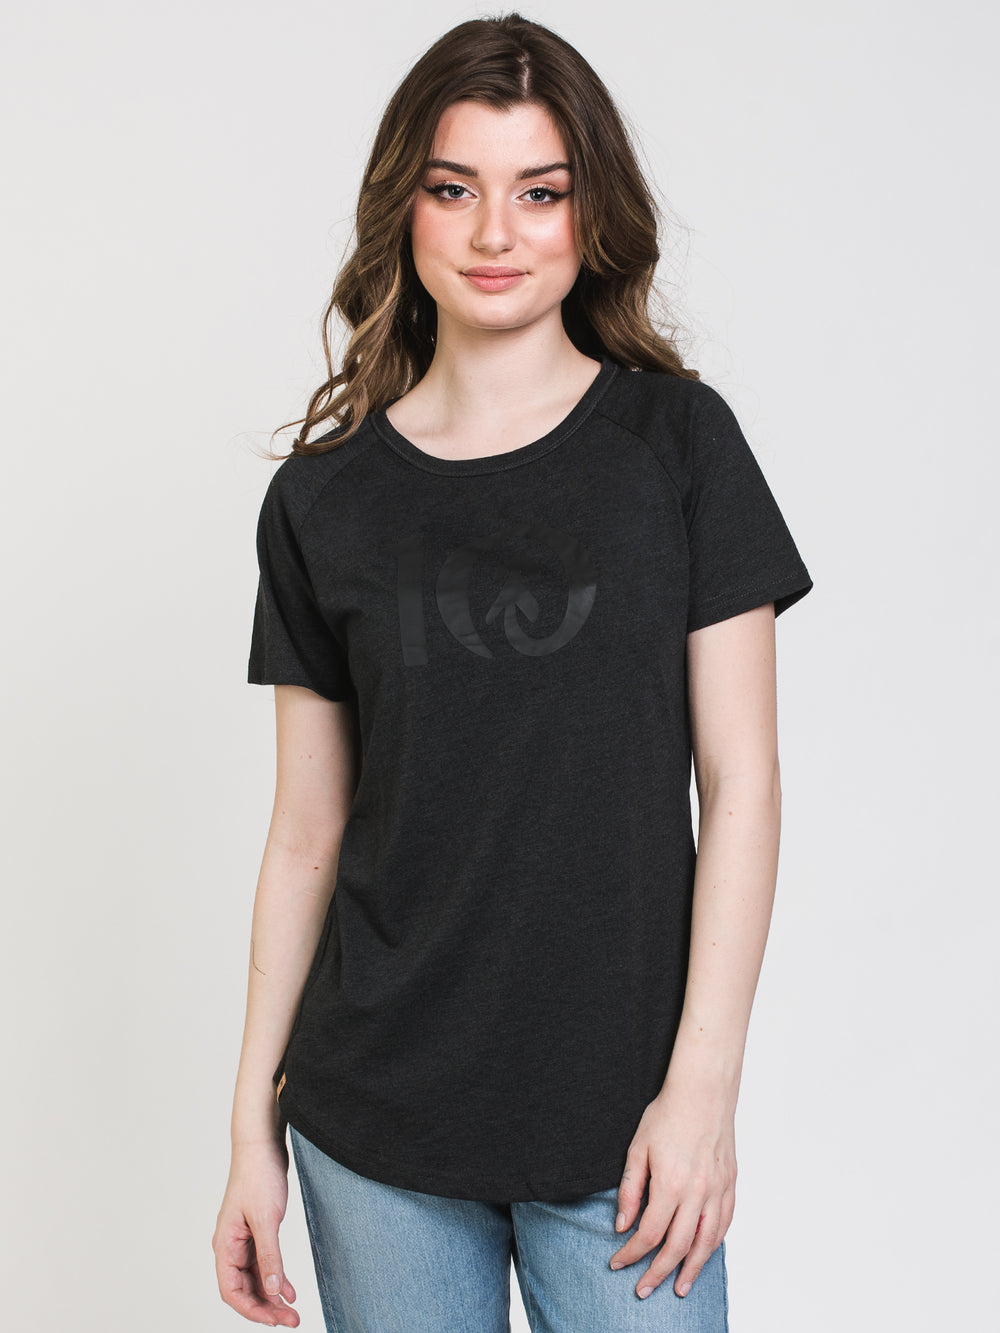 TENTREE RAISED RUBBER LOGO T-SHIRT  - CLEARANCE